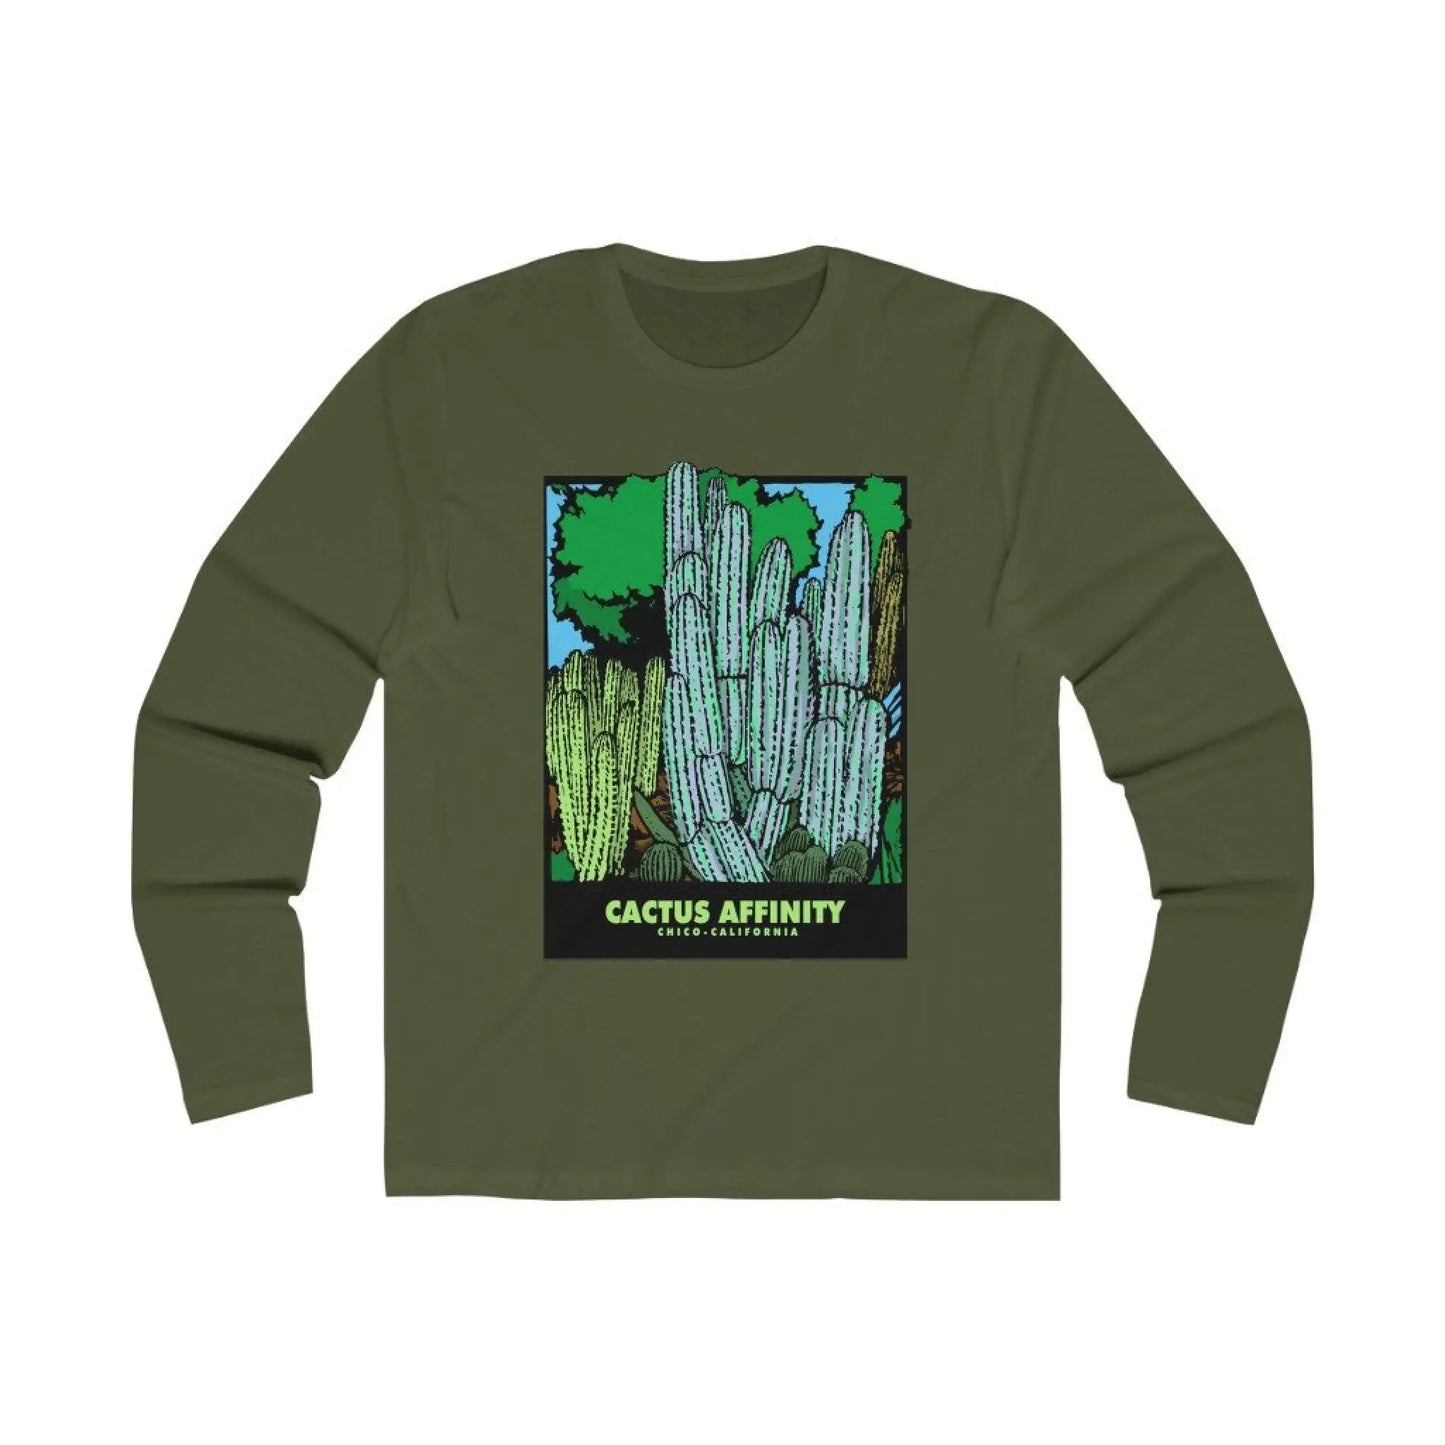 Men’s Long Sleeve Crew Tee - Chico - Solid Military Green /